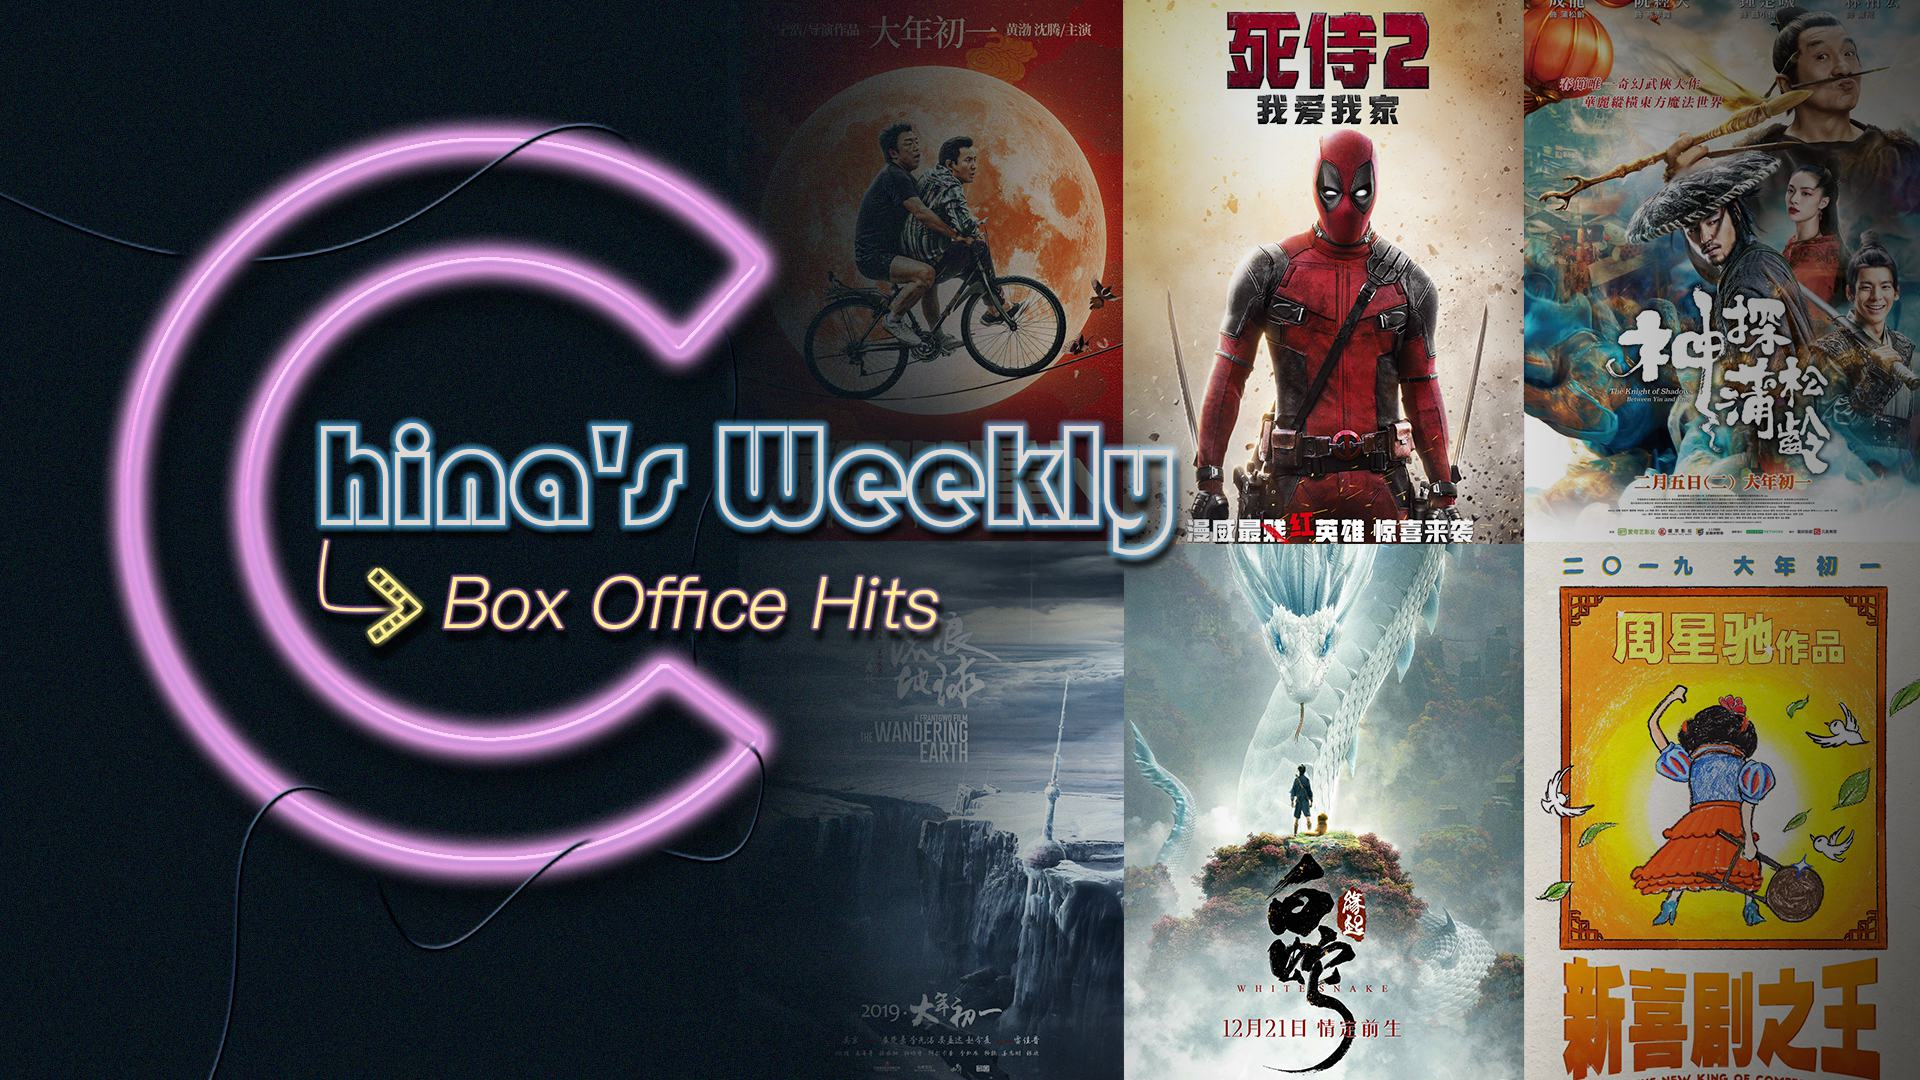 Chinese Box Office Deadpool 2 Leads But Not So Good As